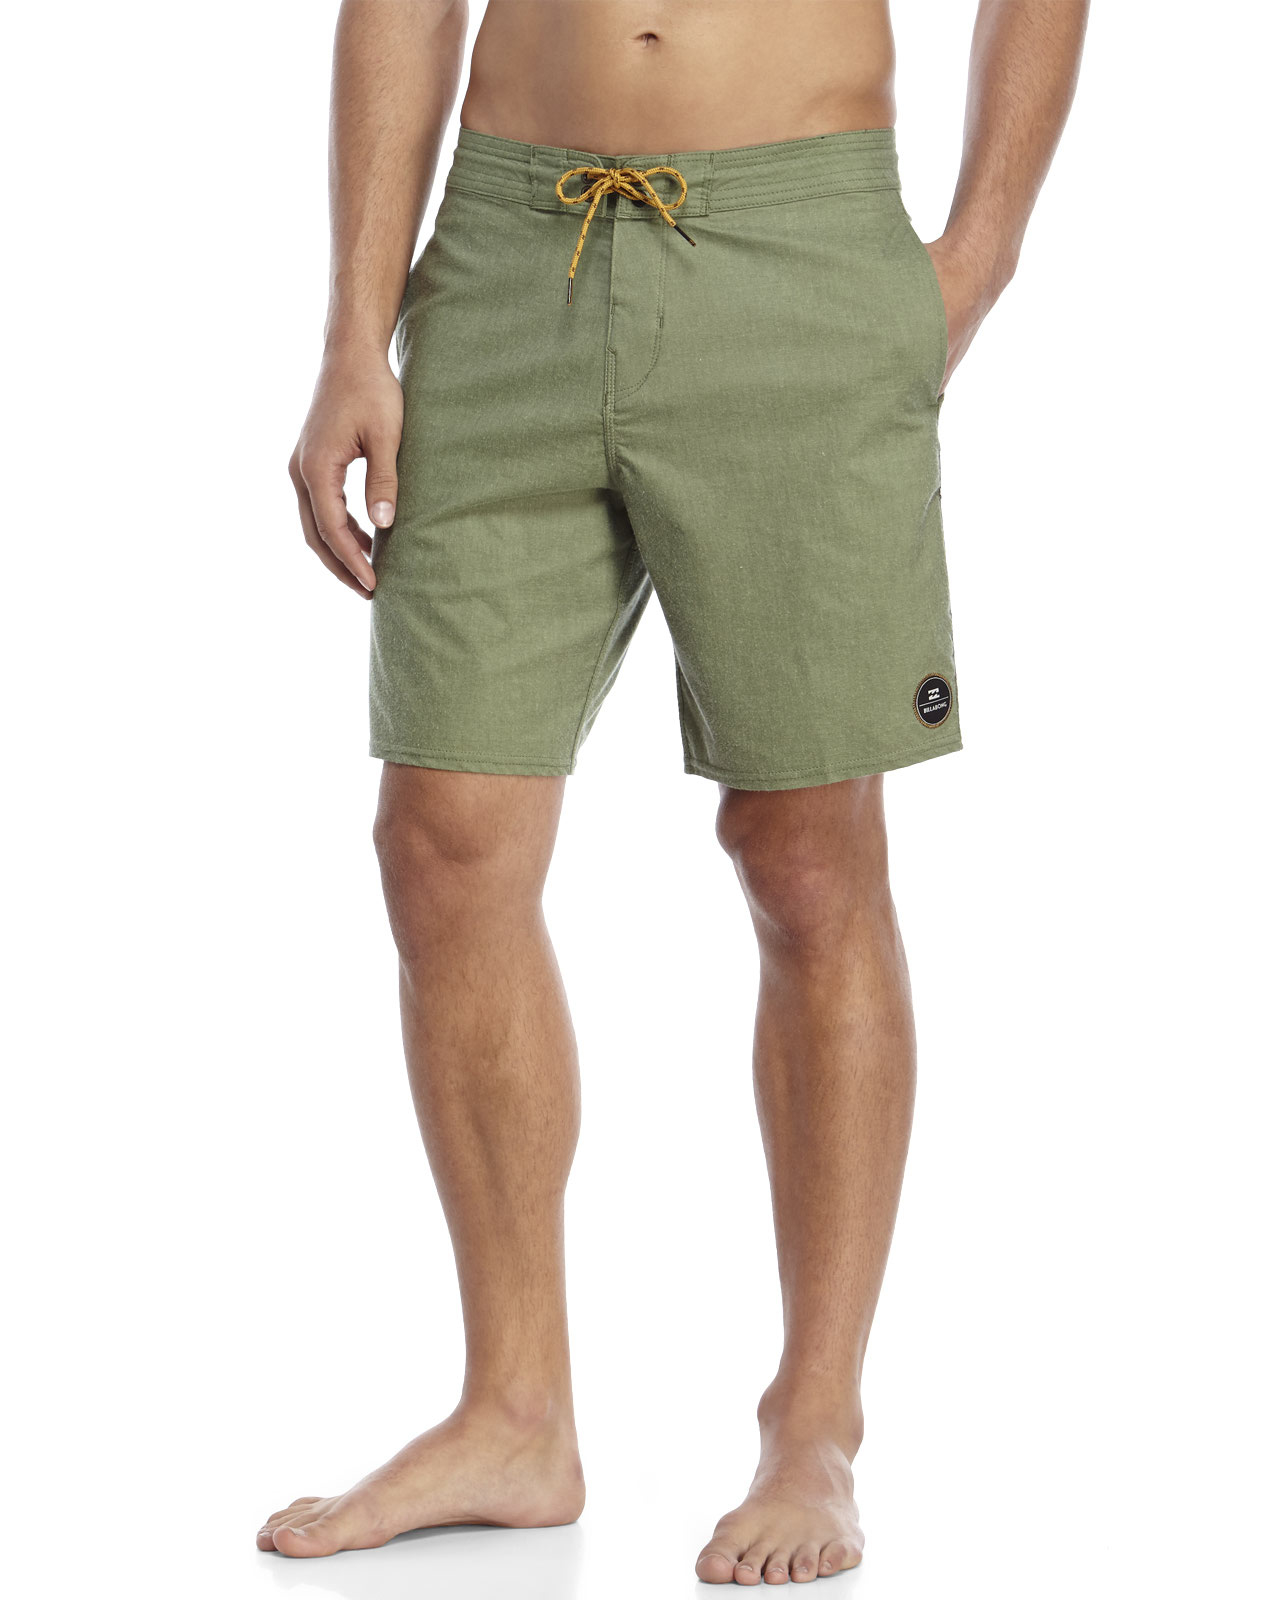 Lyst - Billabong All Day Lo Tides Board Shorts in Green for Men